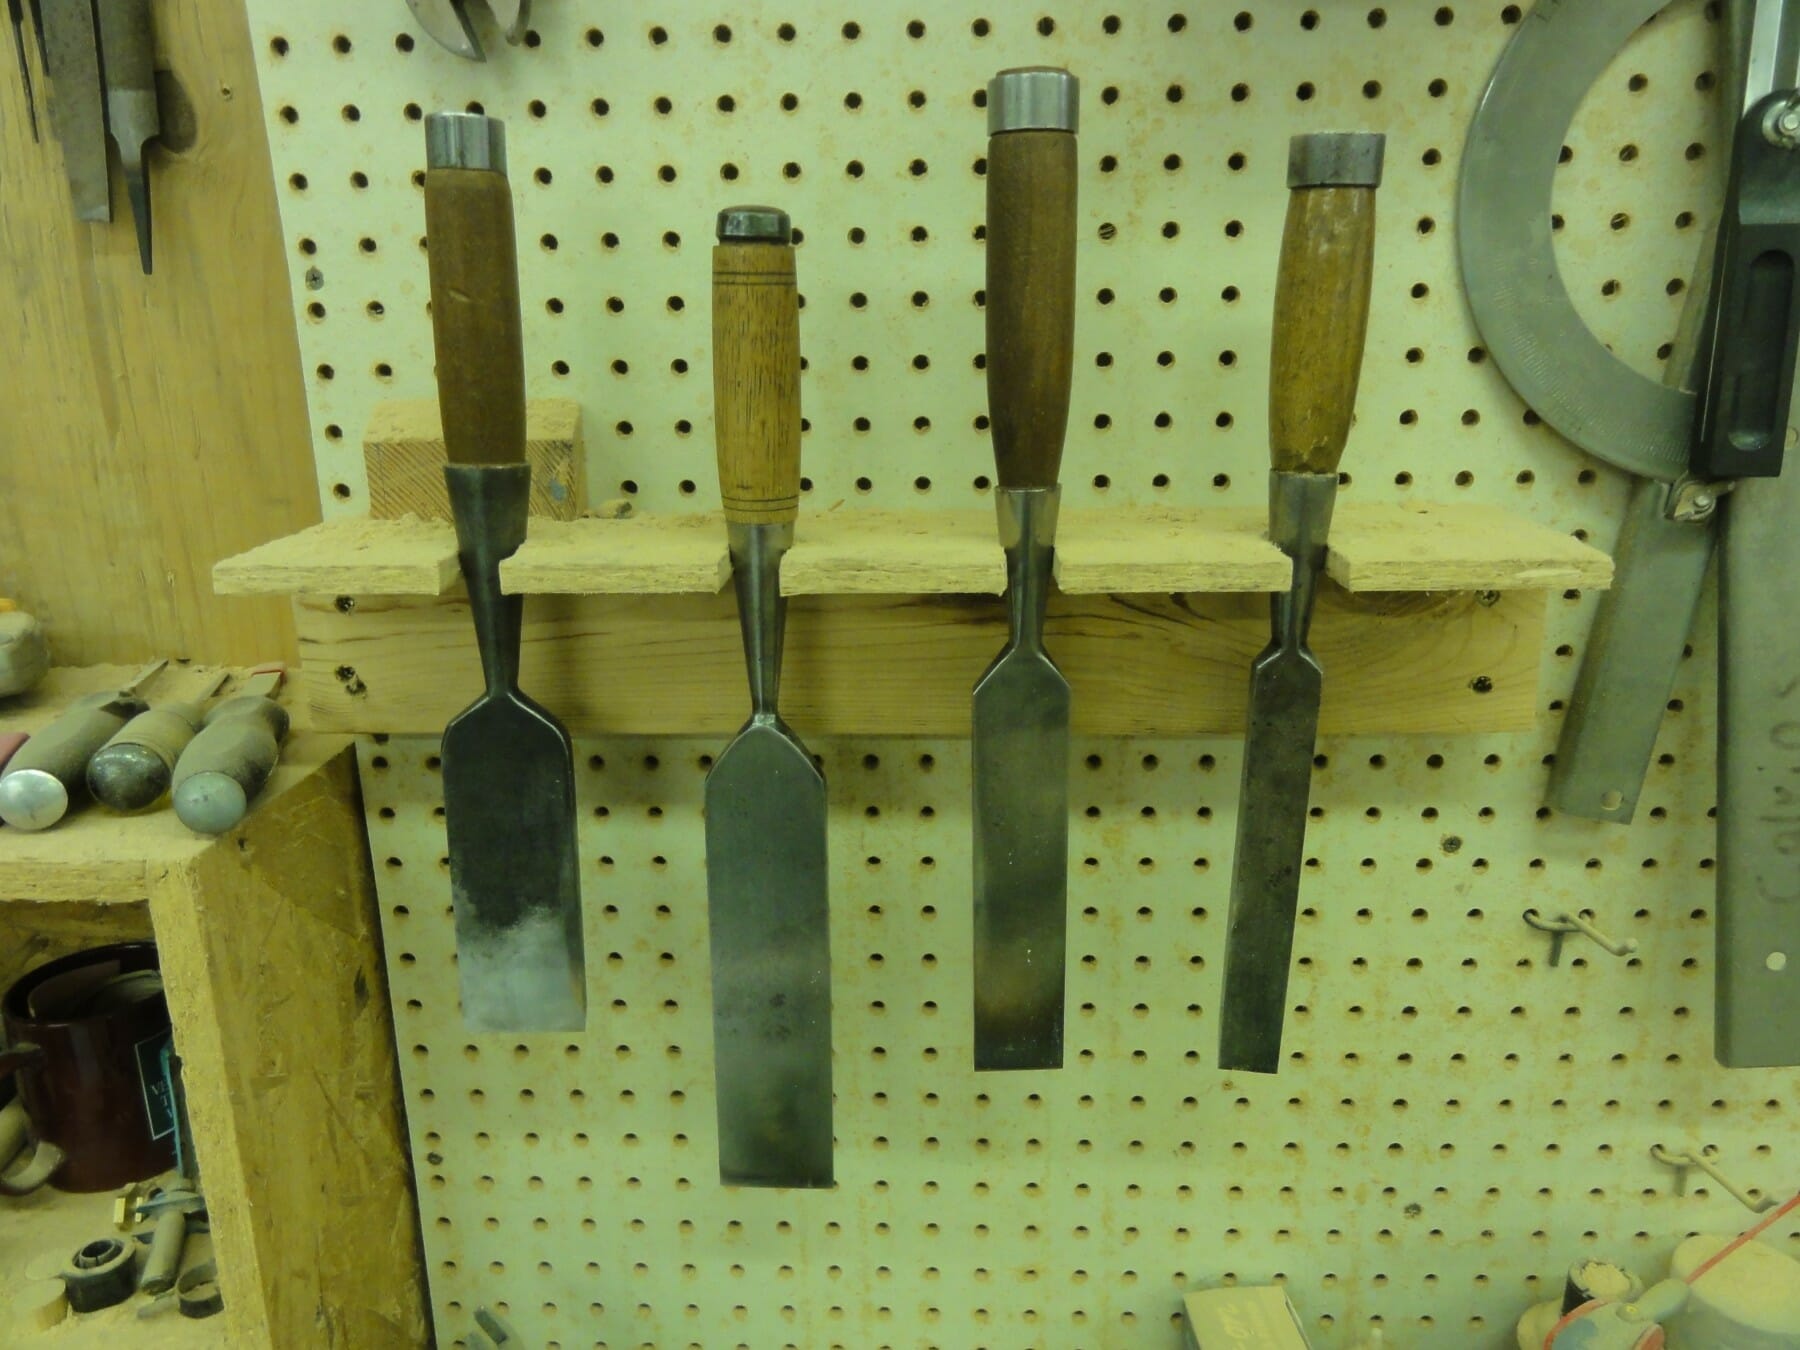 Timber Framing Tools - Chisels